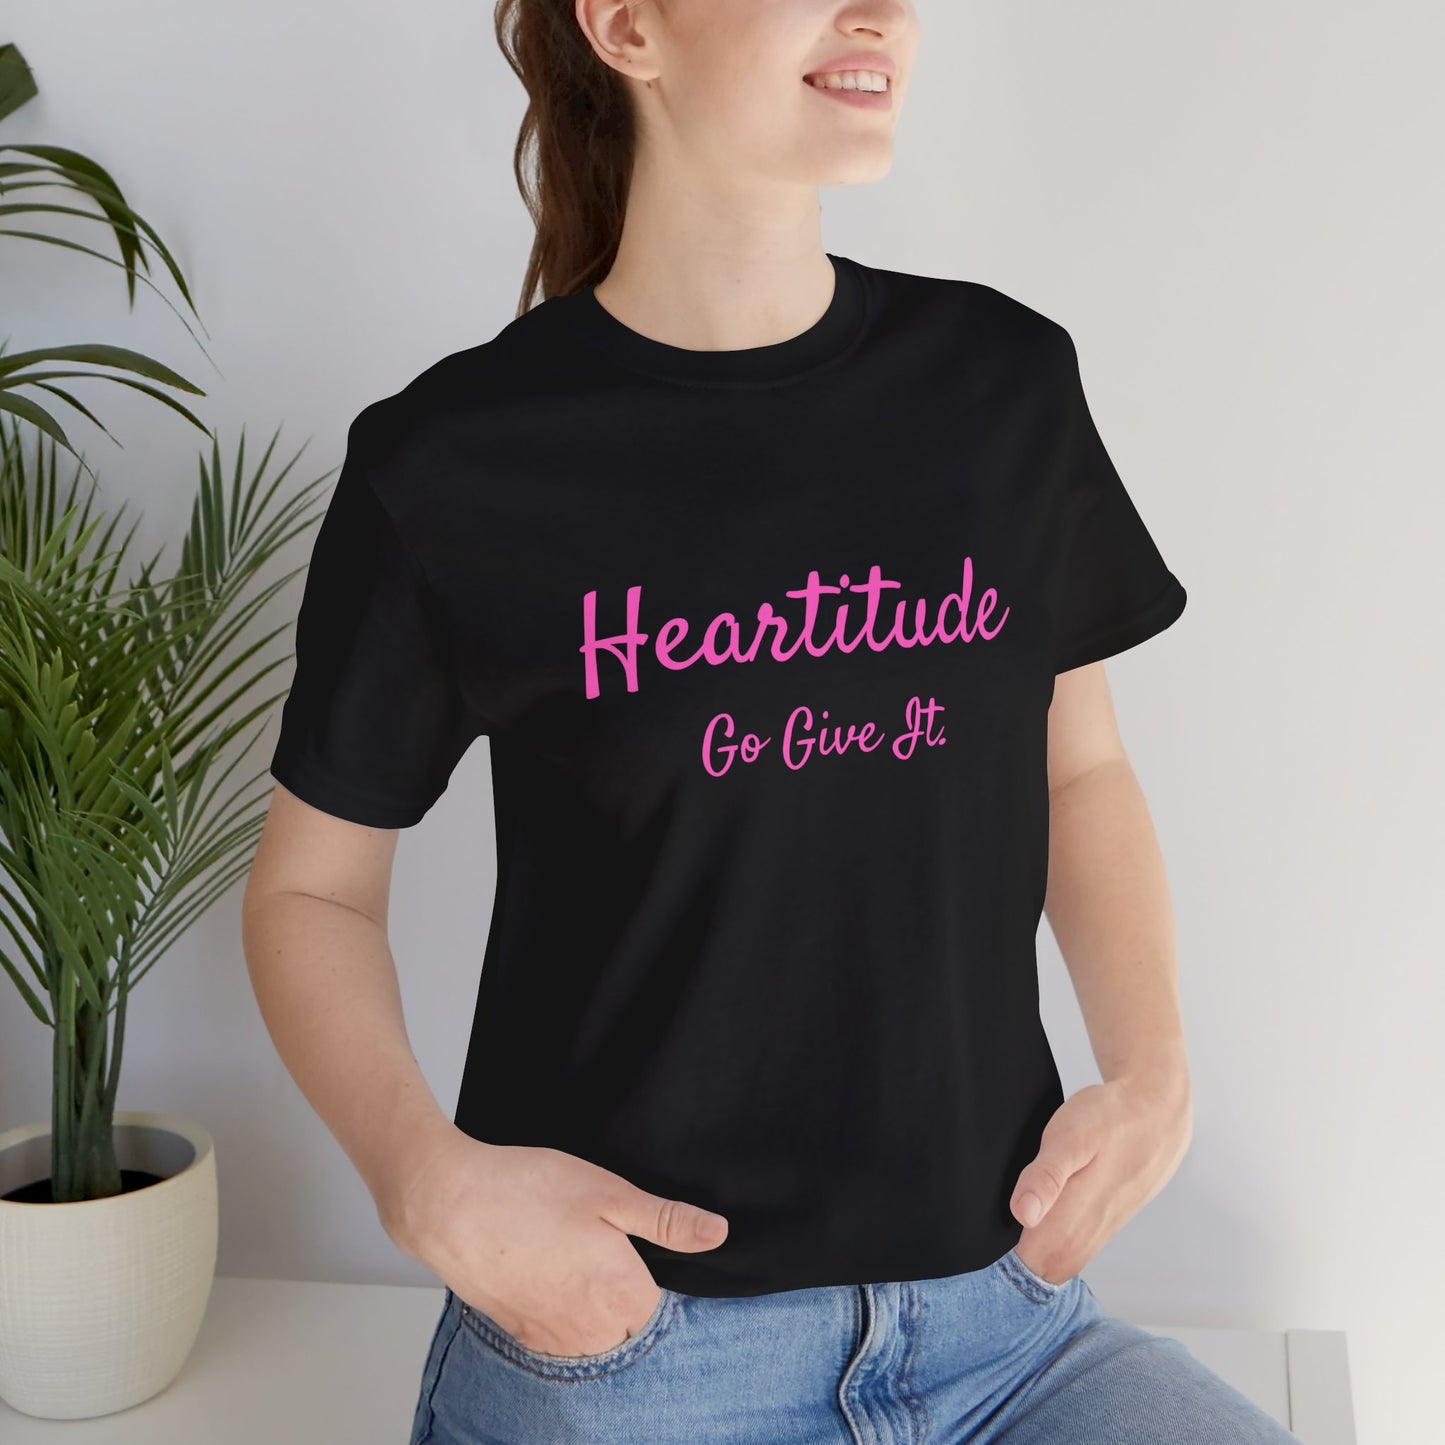 Heartitude: Go Give It In Pink Script Woman's T-shirt (50% to charity)